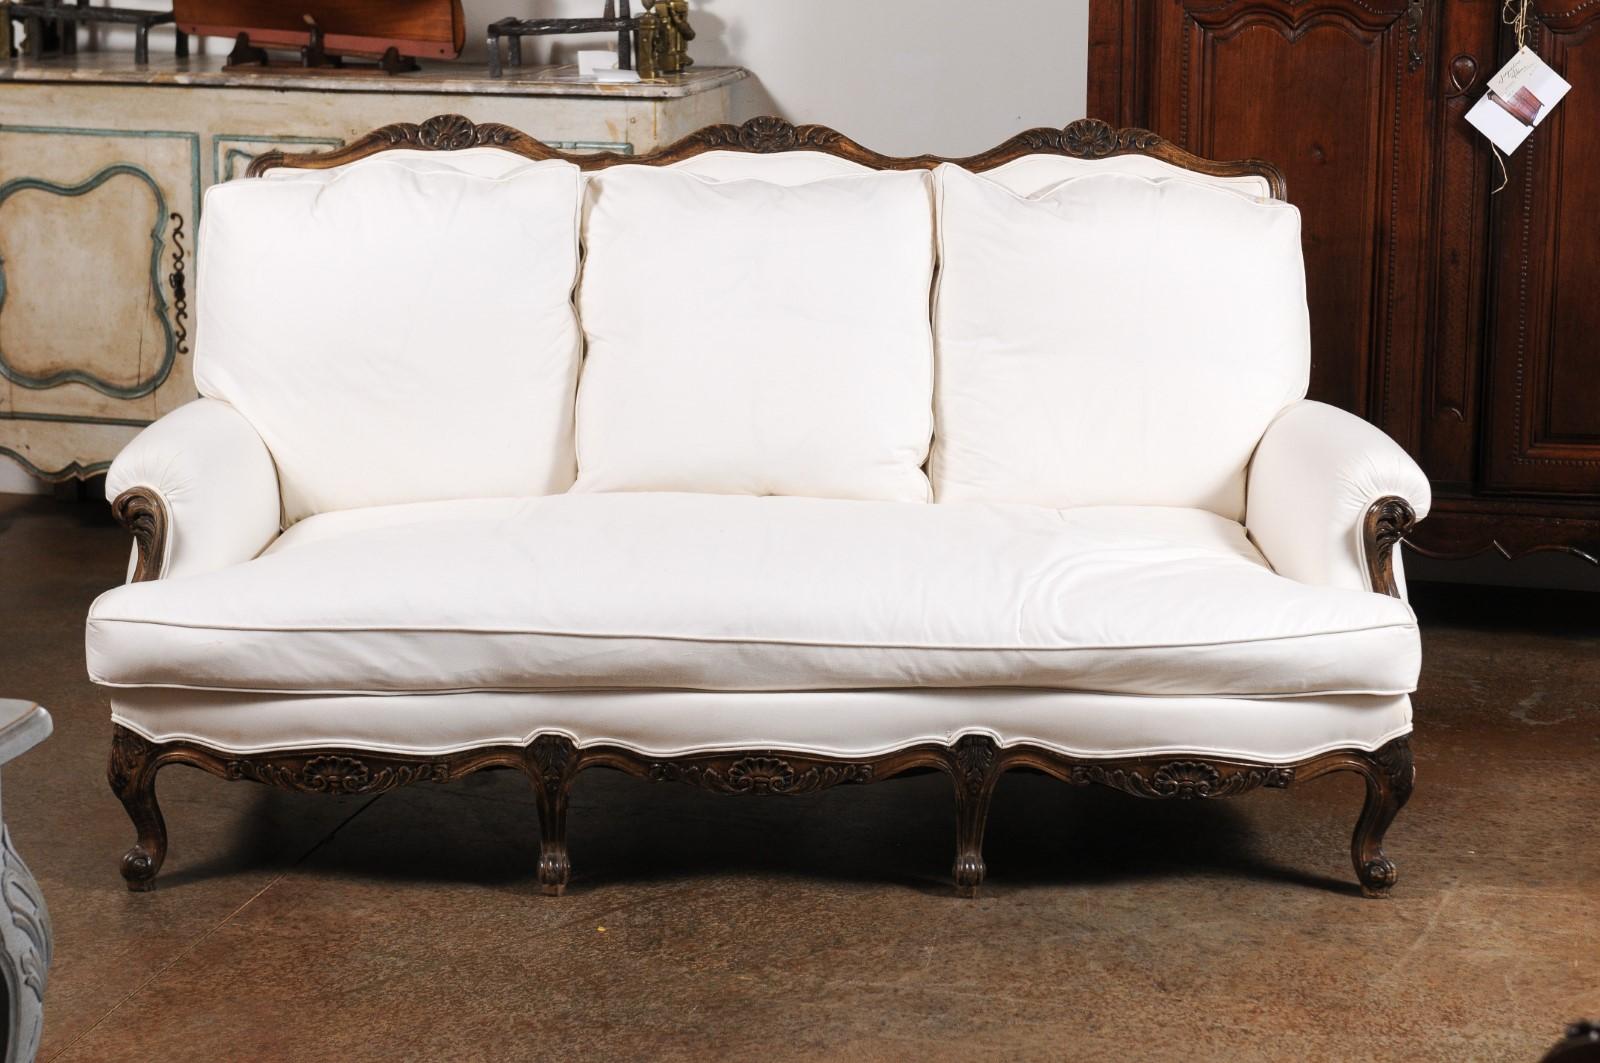 A French Louis XV style wooden three-seat sofa from the 19th century with cabriole legs and new upholstery. Born in France during the 19th century, this canapé presents the stylistic characteristics of the Louis XV era. The scrolled upper rail is